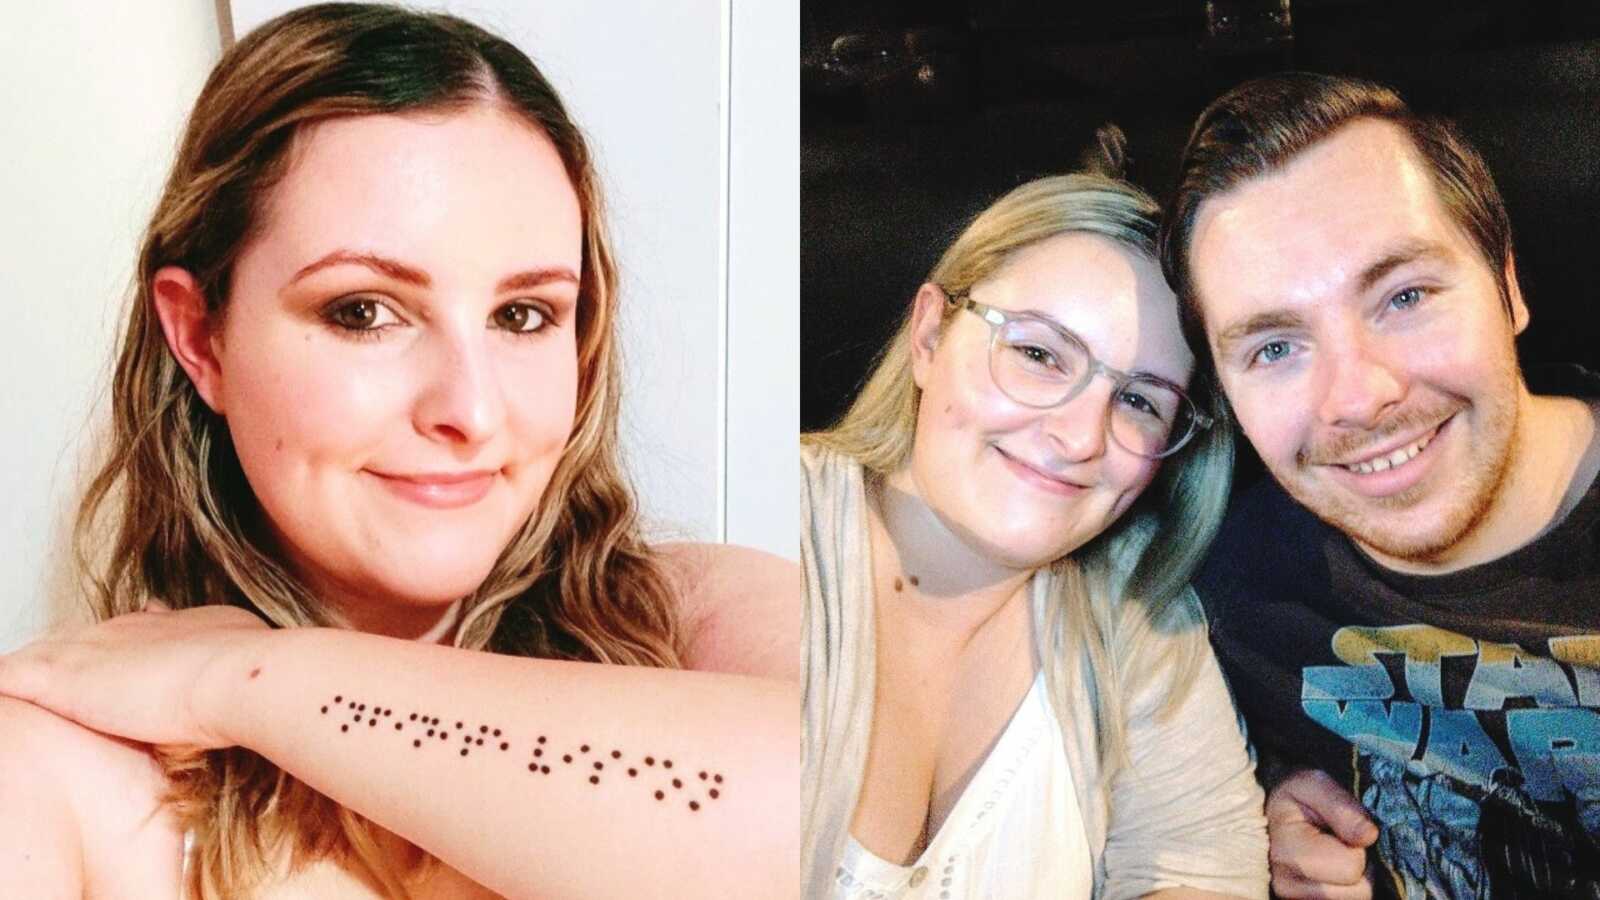 A blind woman displays a braille tattoo and a woman with her partner